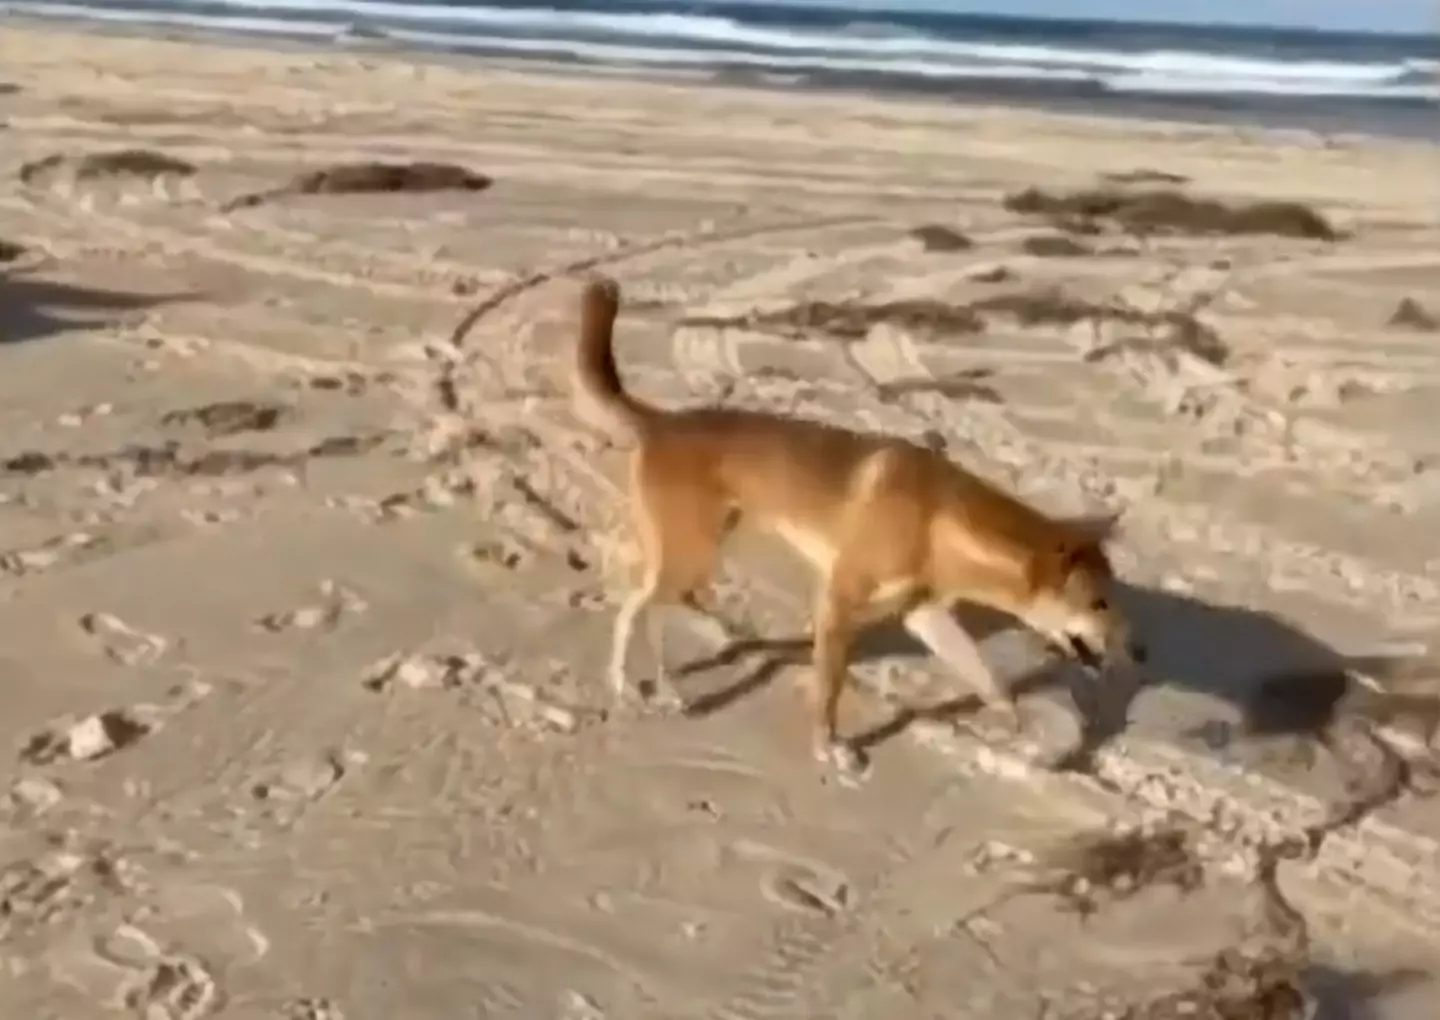 The dingo was one of several which was filmed on the beach but this one attacked a sunbather.